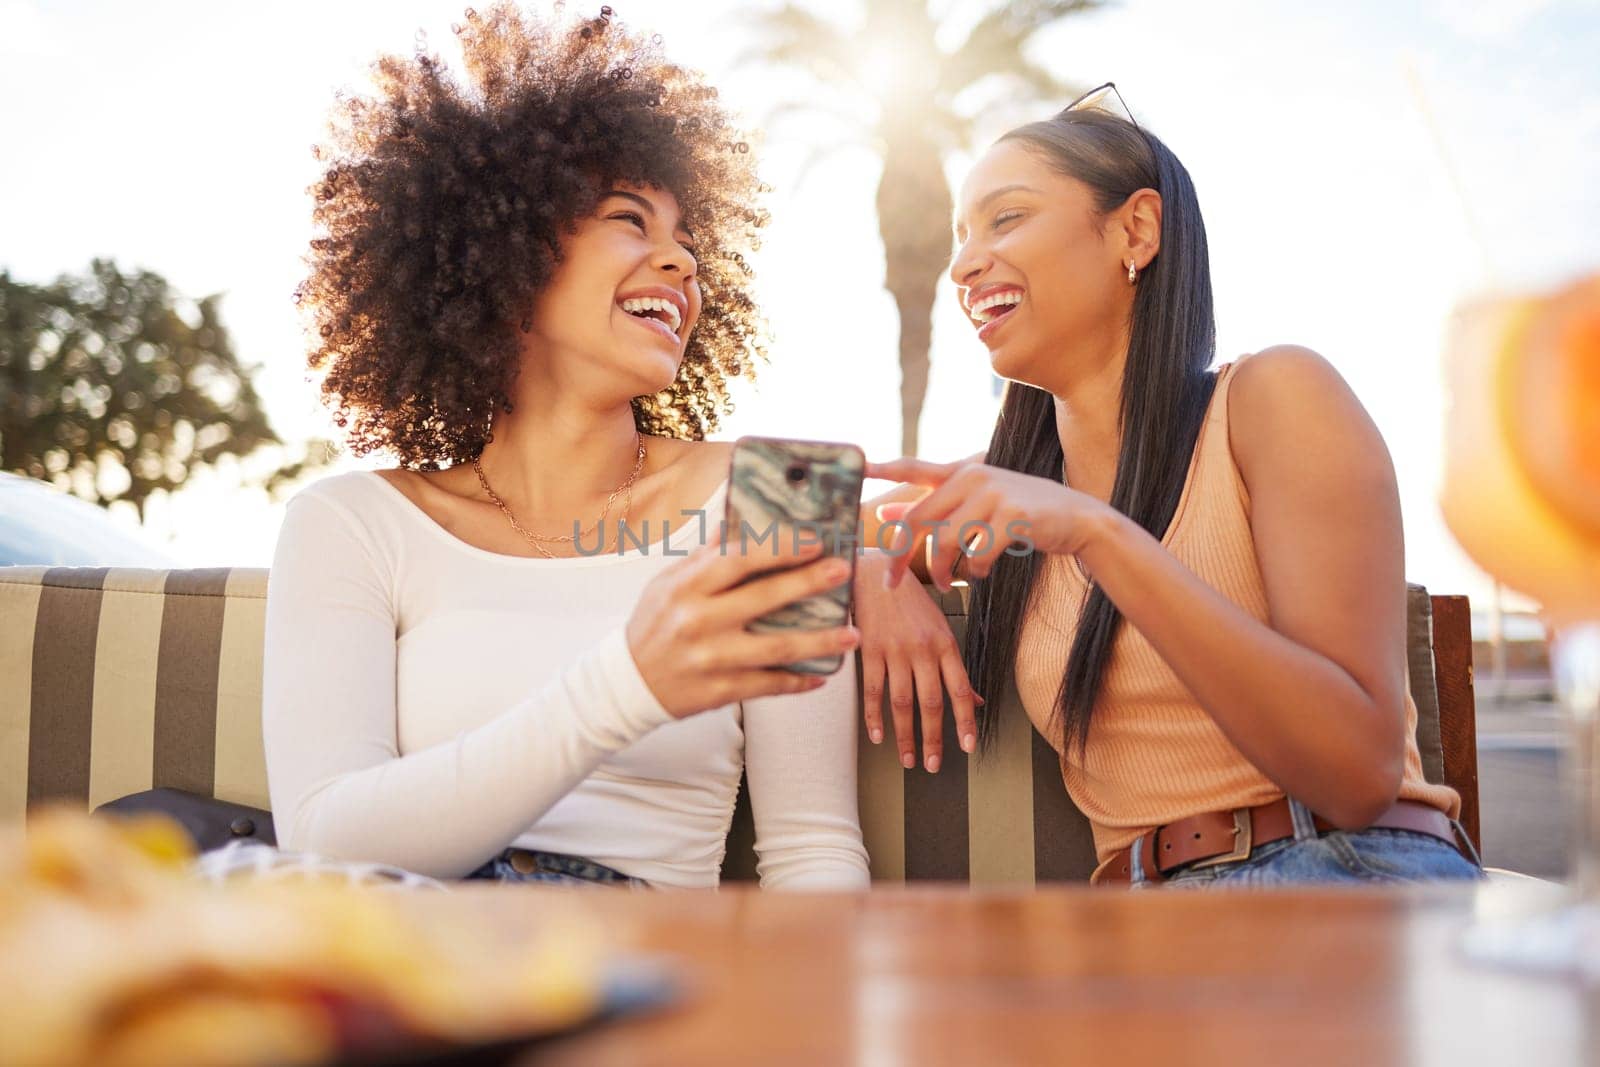 Laughing, happy and women with a phone at a cafe for a meme or social media notification. Smile, talking and friends with a mobile for a funny app, comic conversation or comedy together at restaurant by YuriArcurs